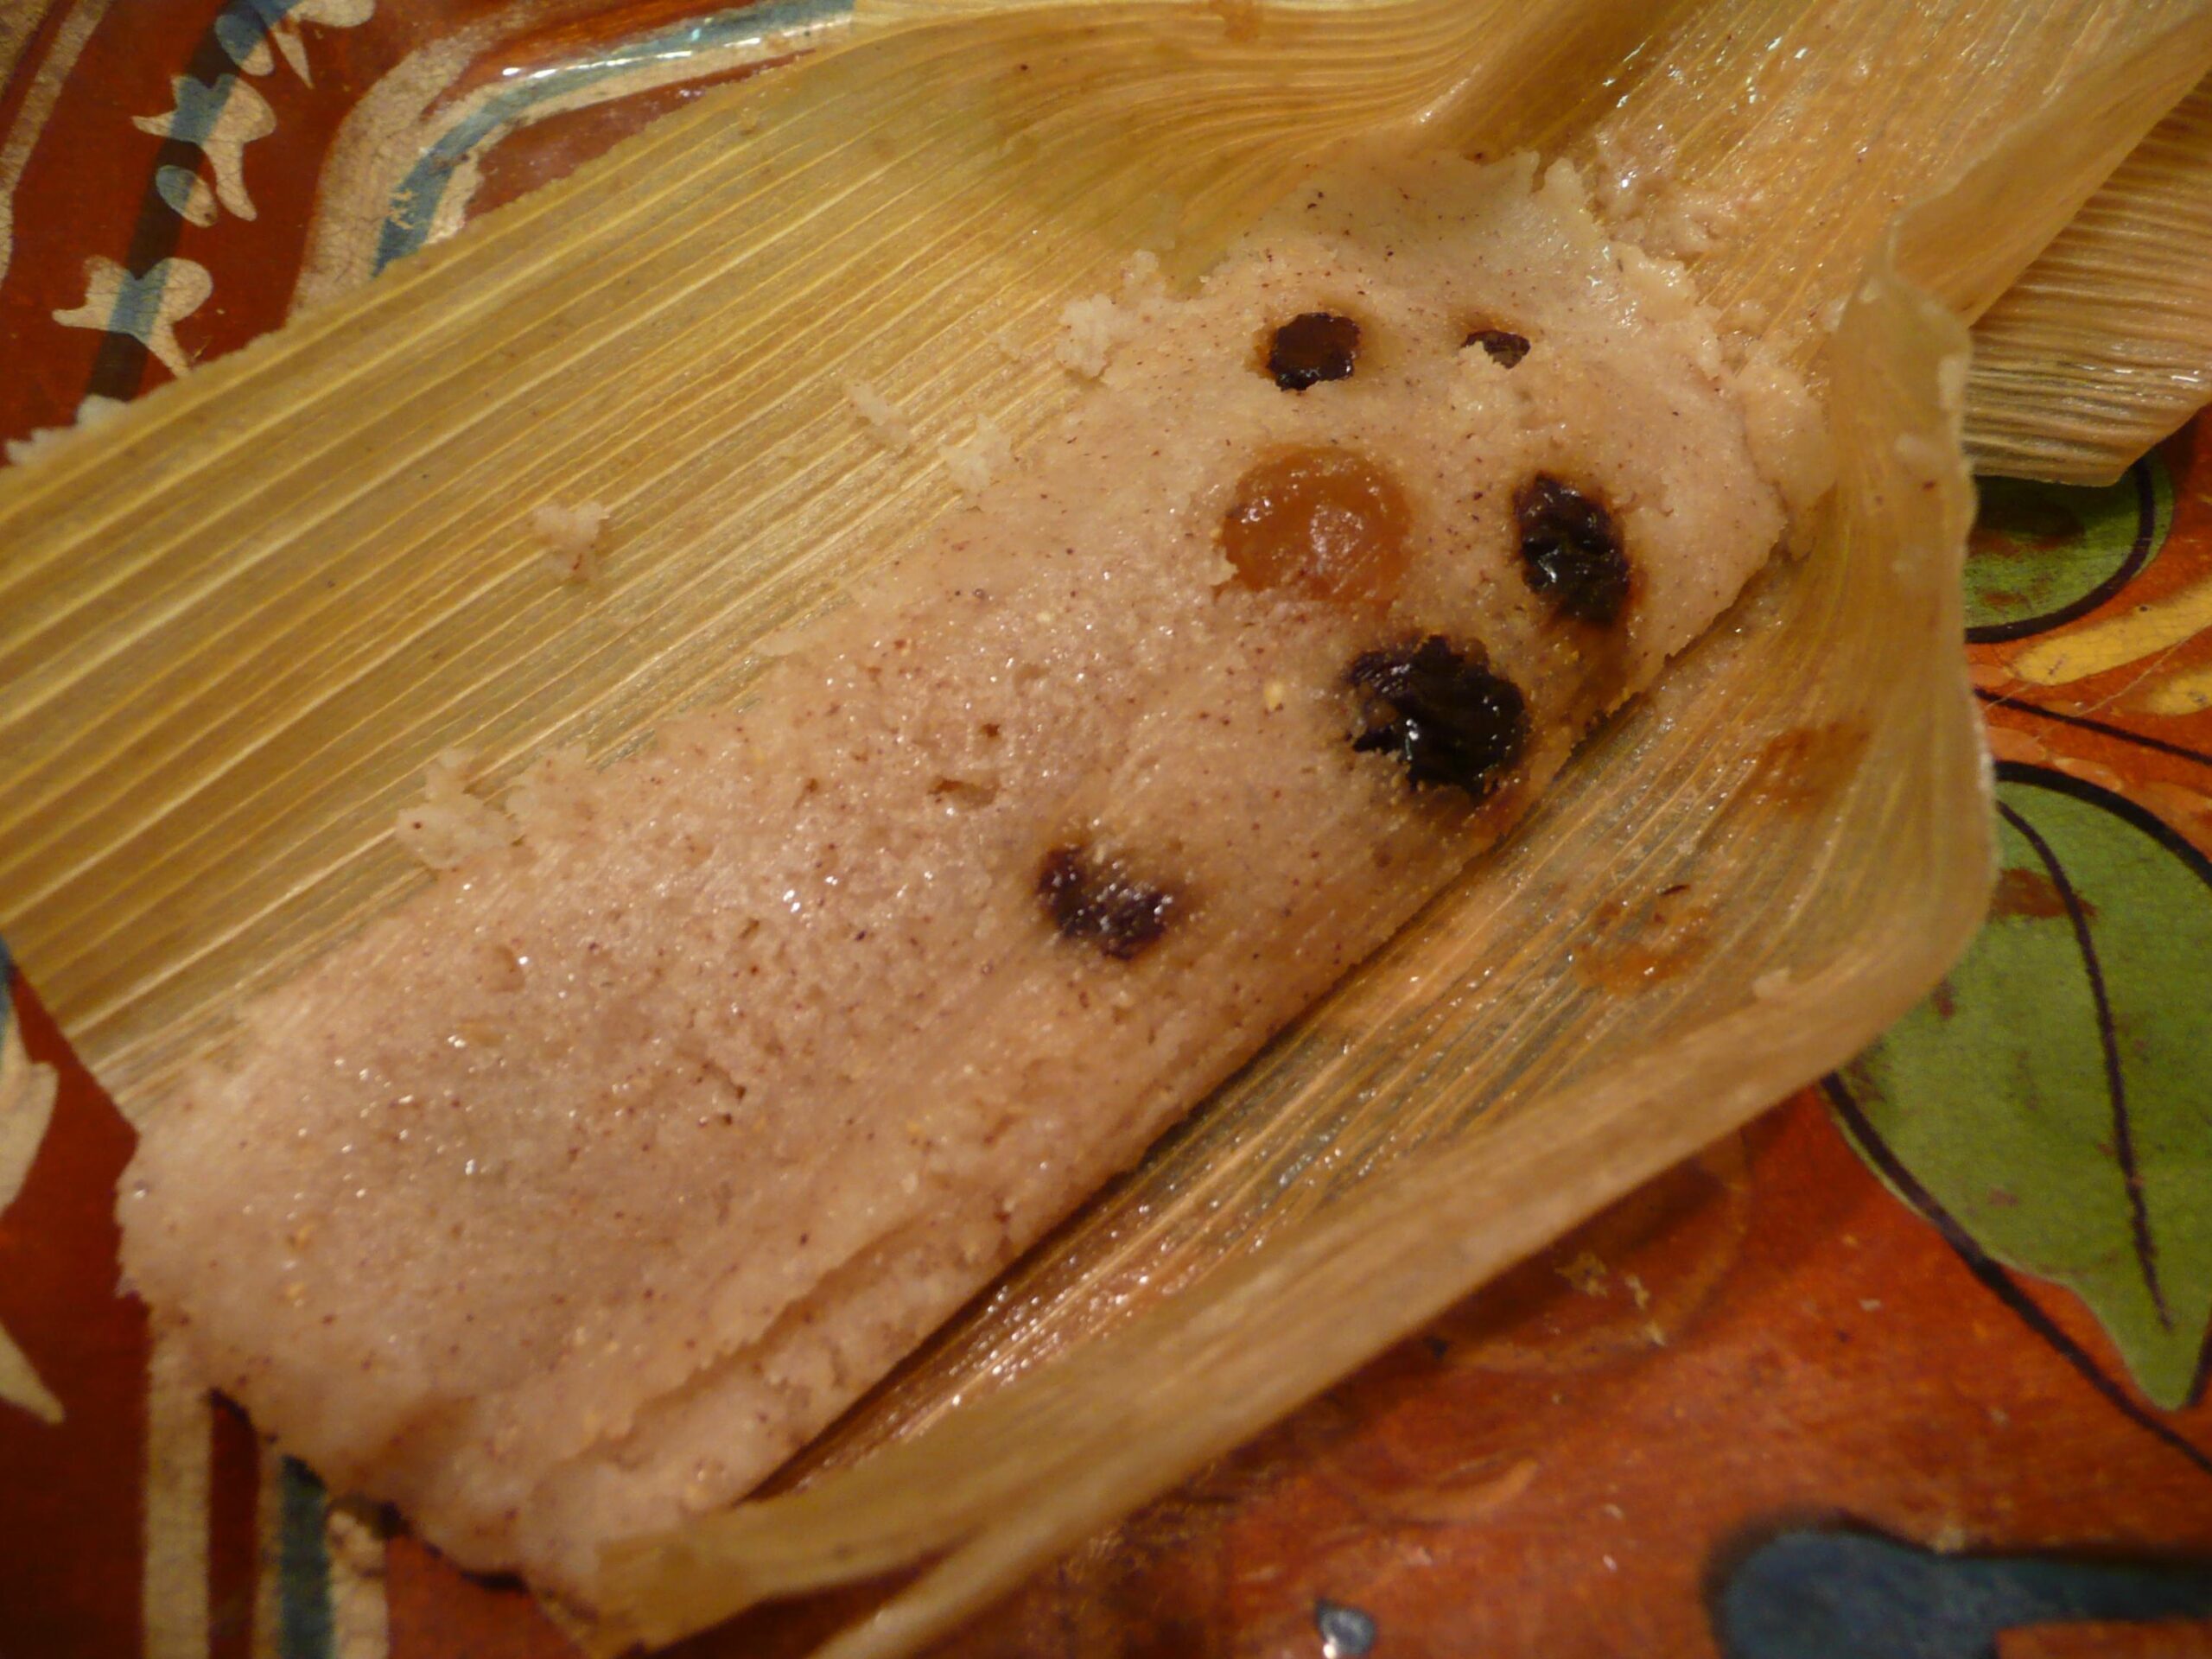  Impress your guests with this unique and delicious tamale recipe.